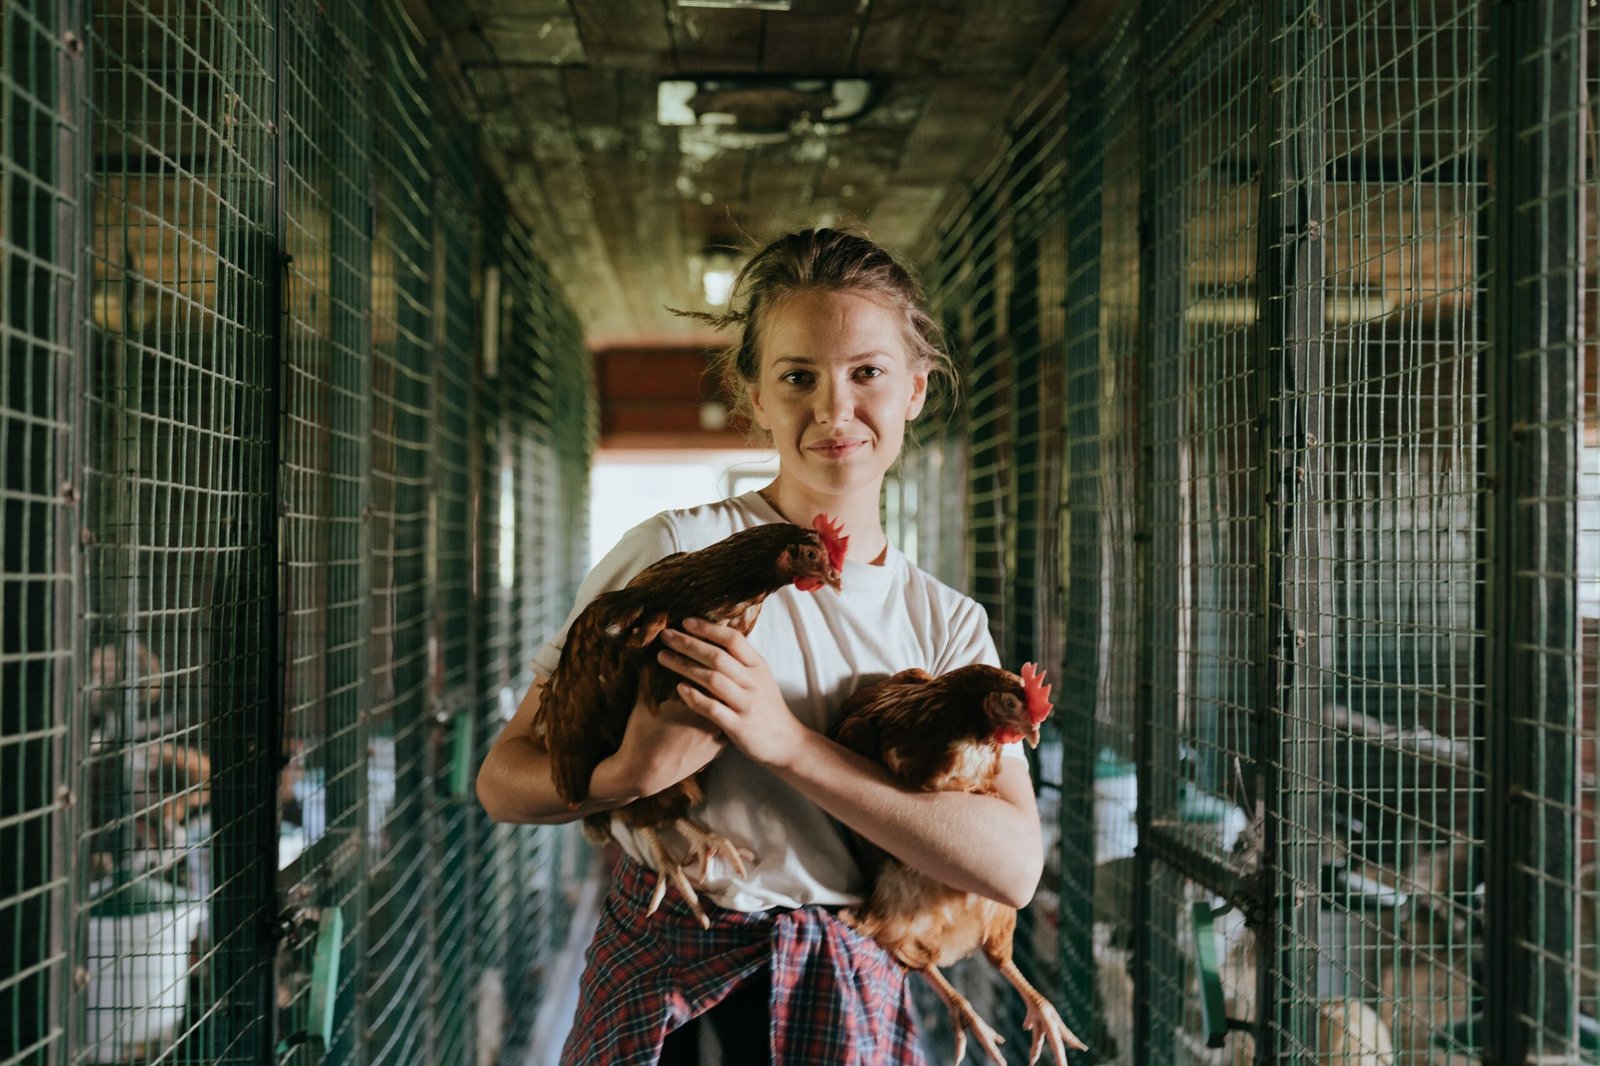 Can Chickens Be Raised In A Fully Automated, Tech-driven Coop?